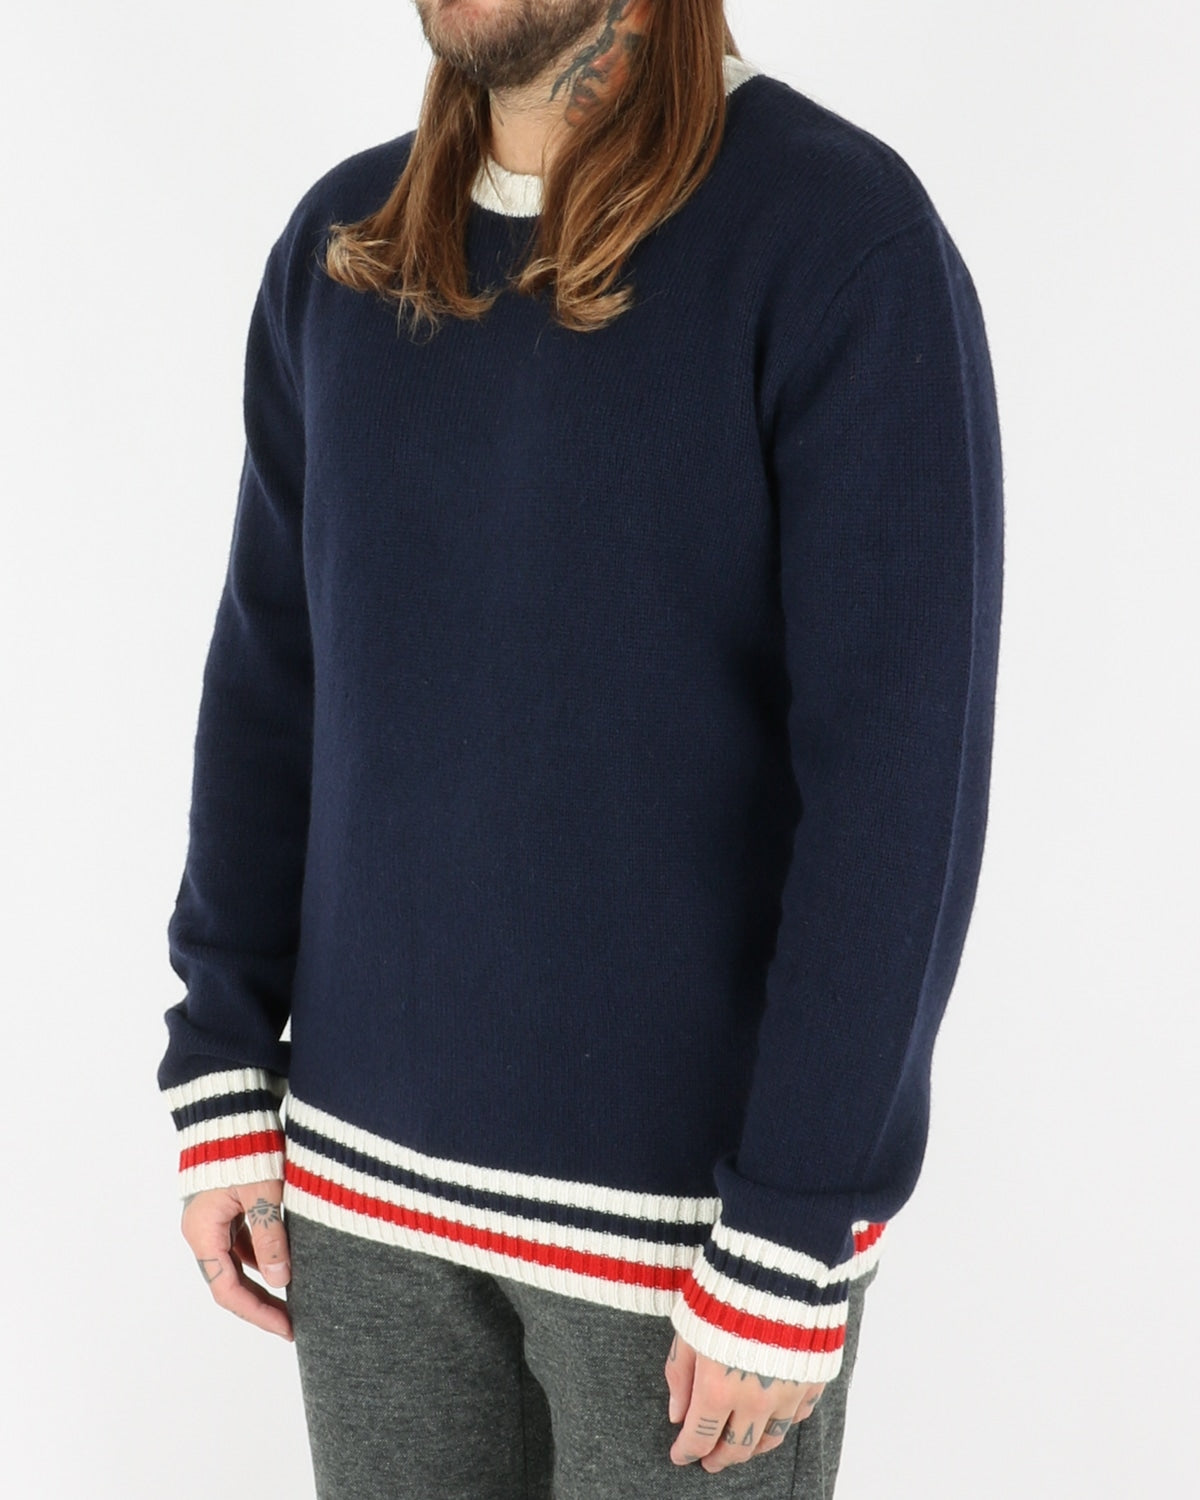 les deux_french lambswool jumper_dark navy_2_3